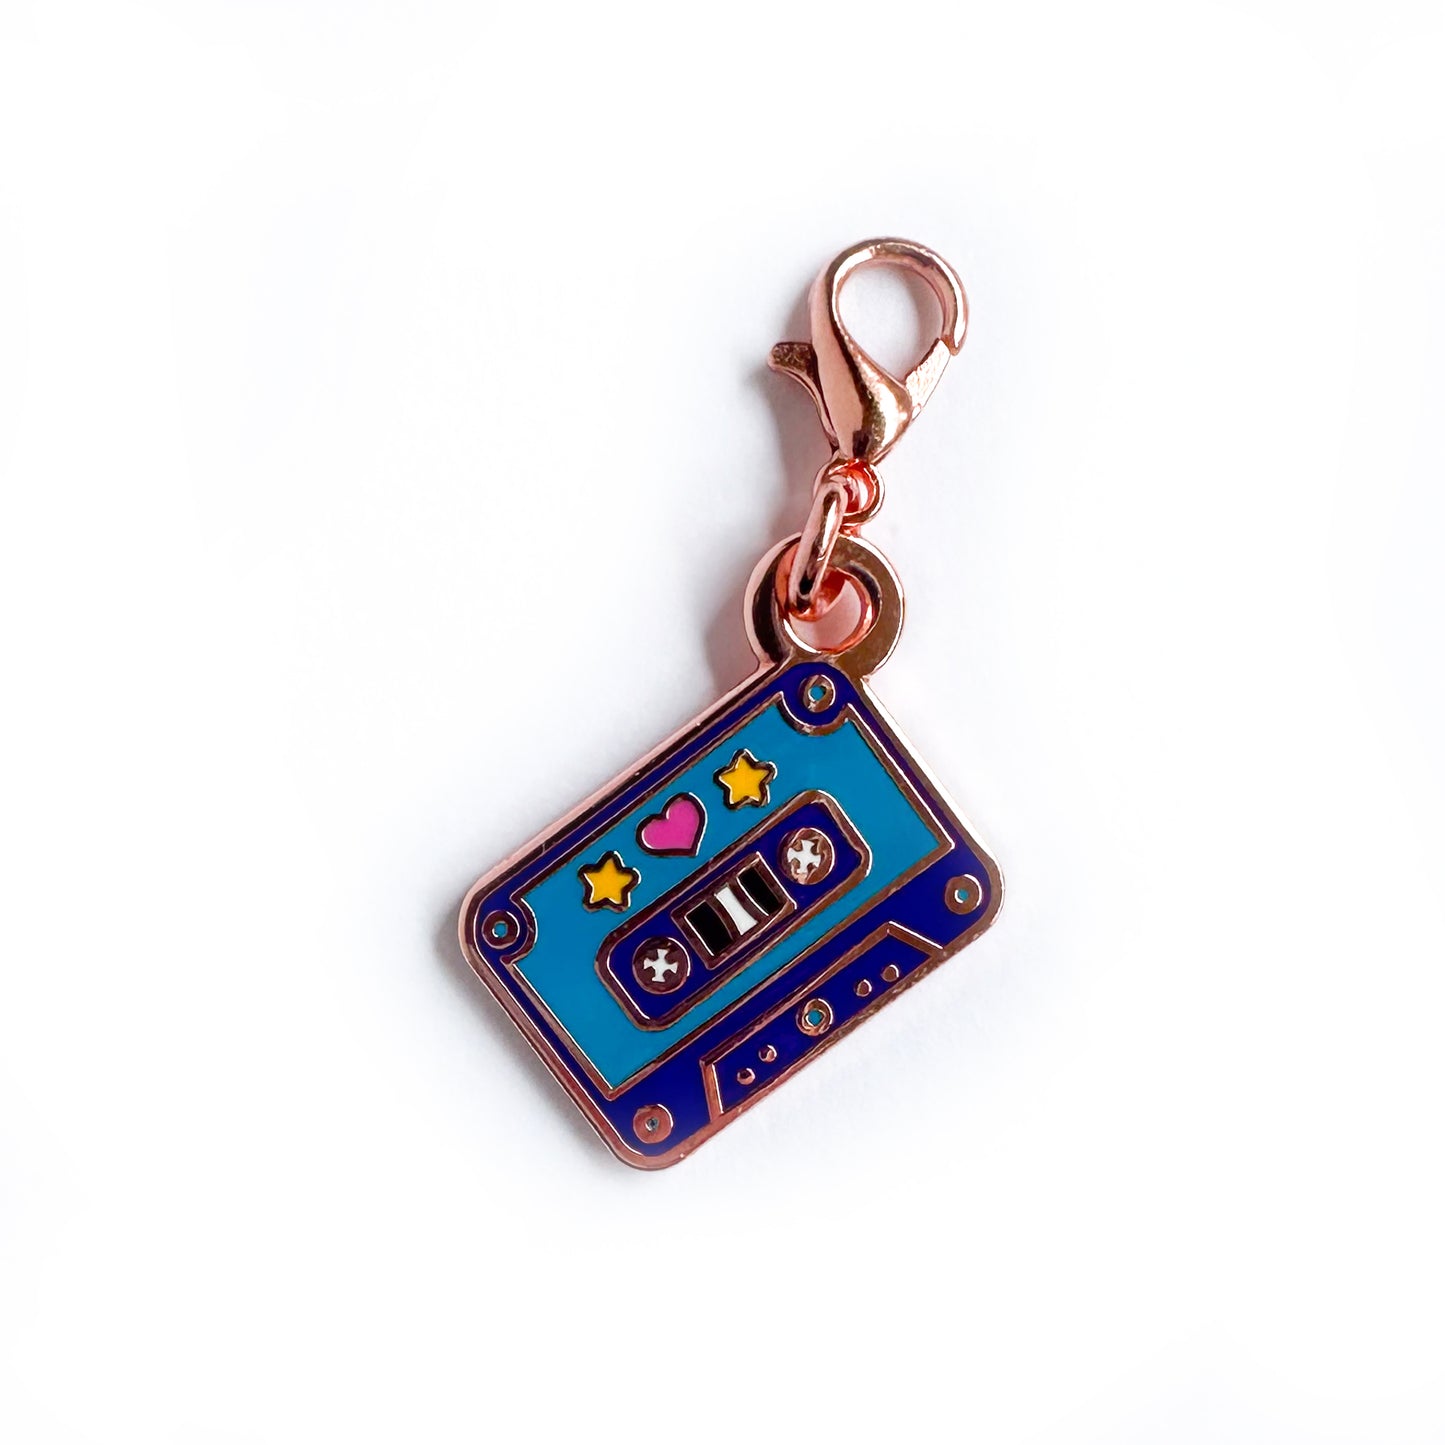 A lobster claw clasp charm of a purple and teal cassette tape